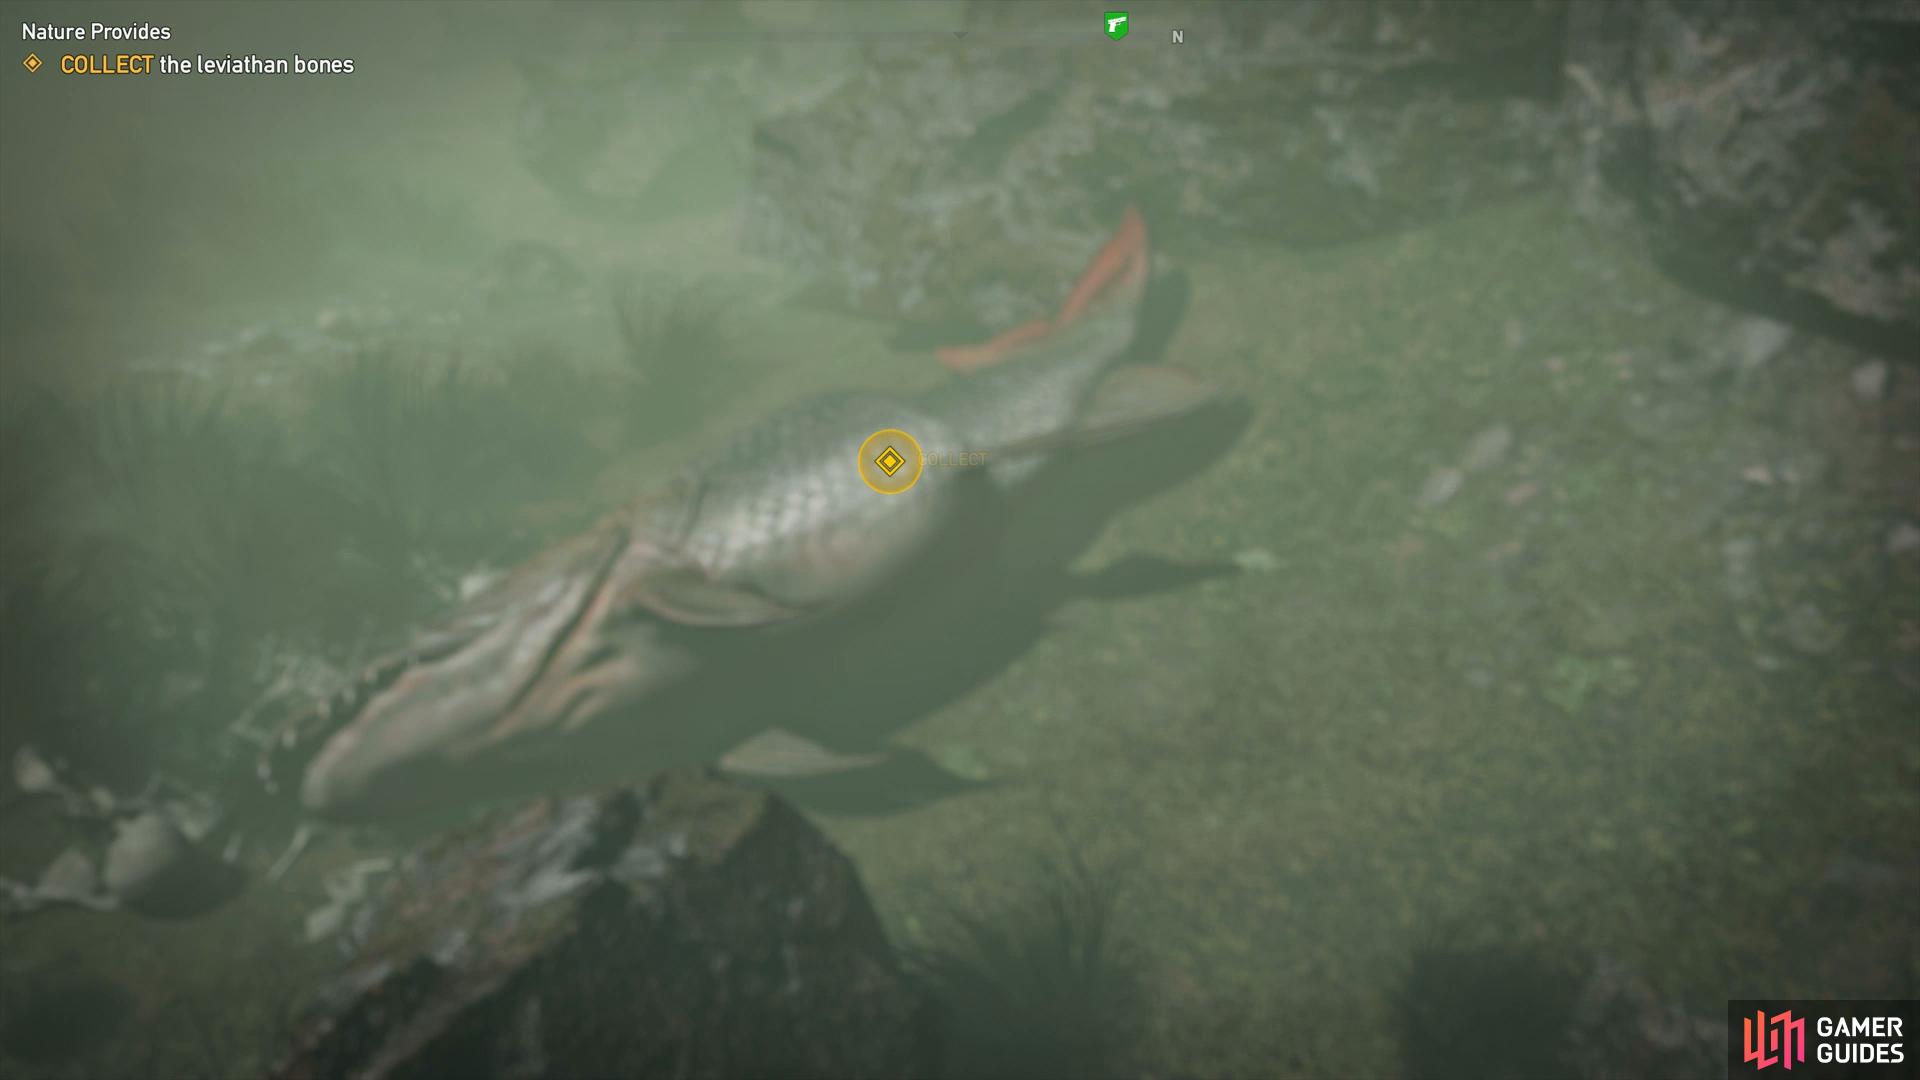 You'll want the Human Fish Perk so that you can swim under without any worries.